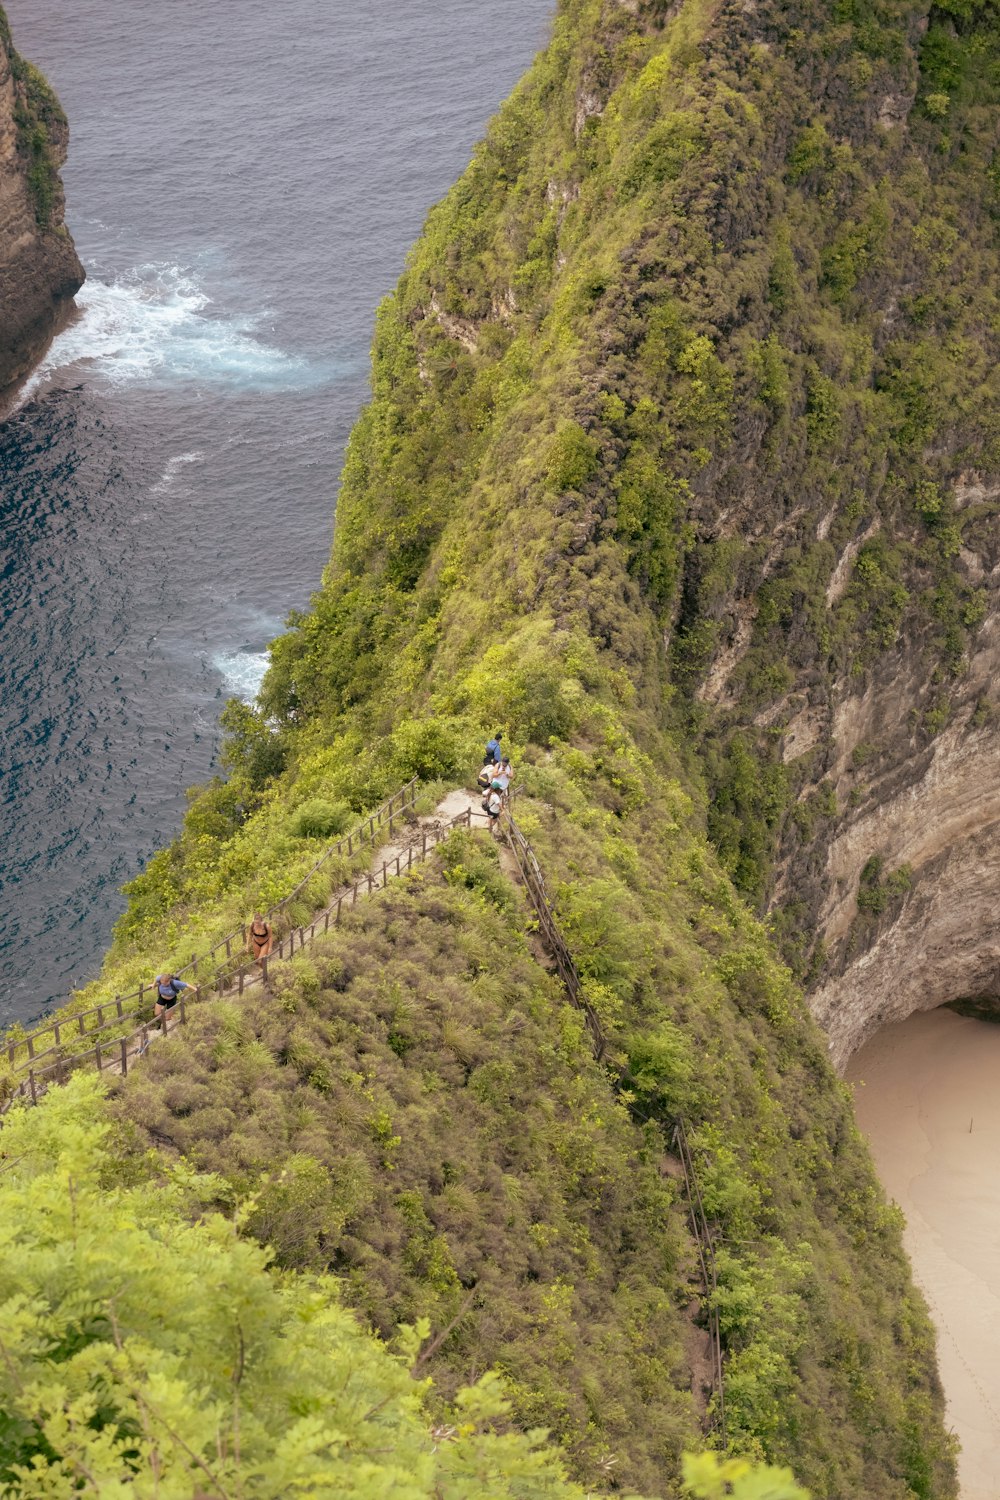 a group of people walking up a steep hill next to the ocean